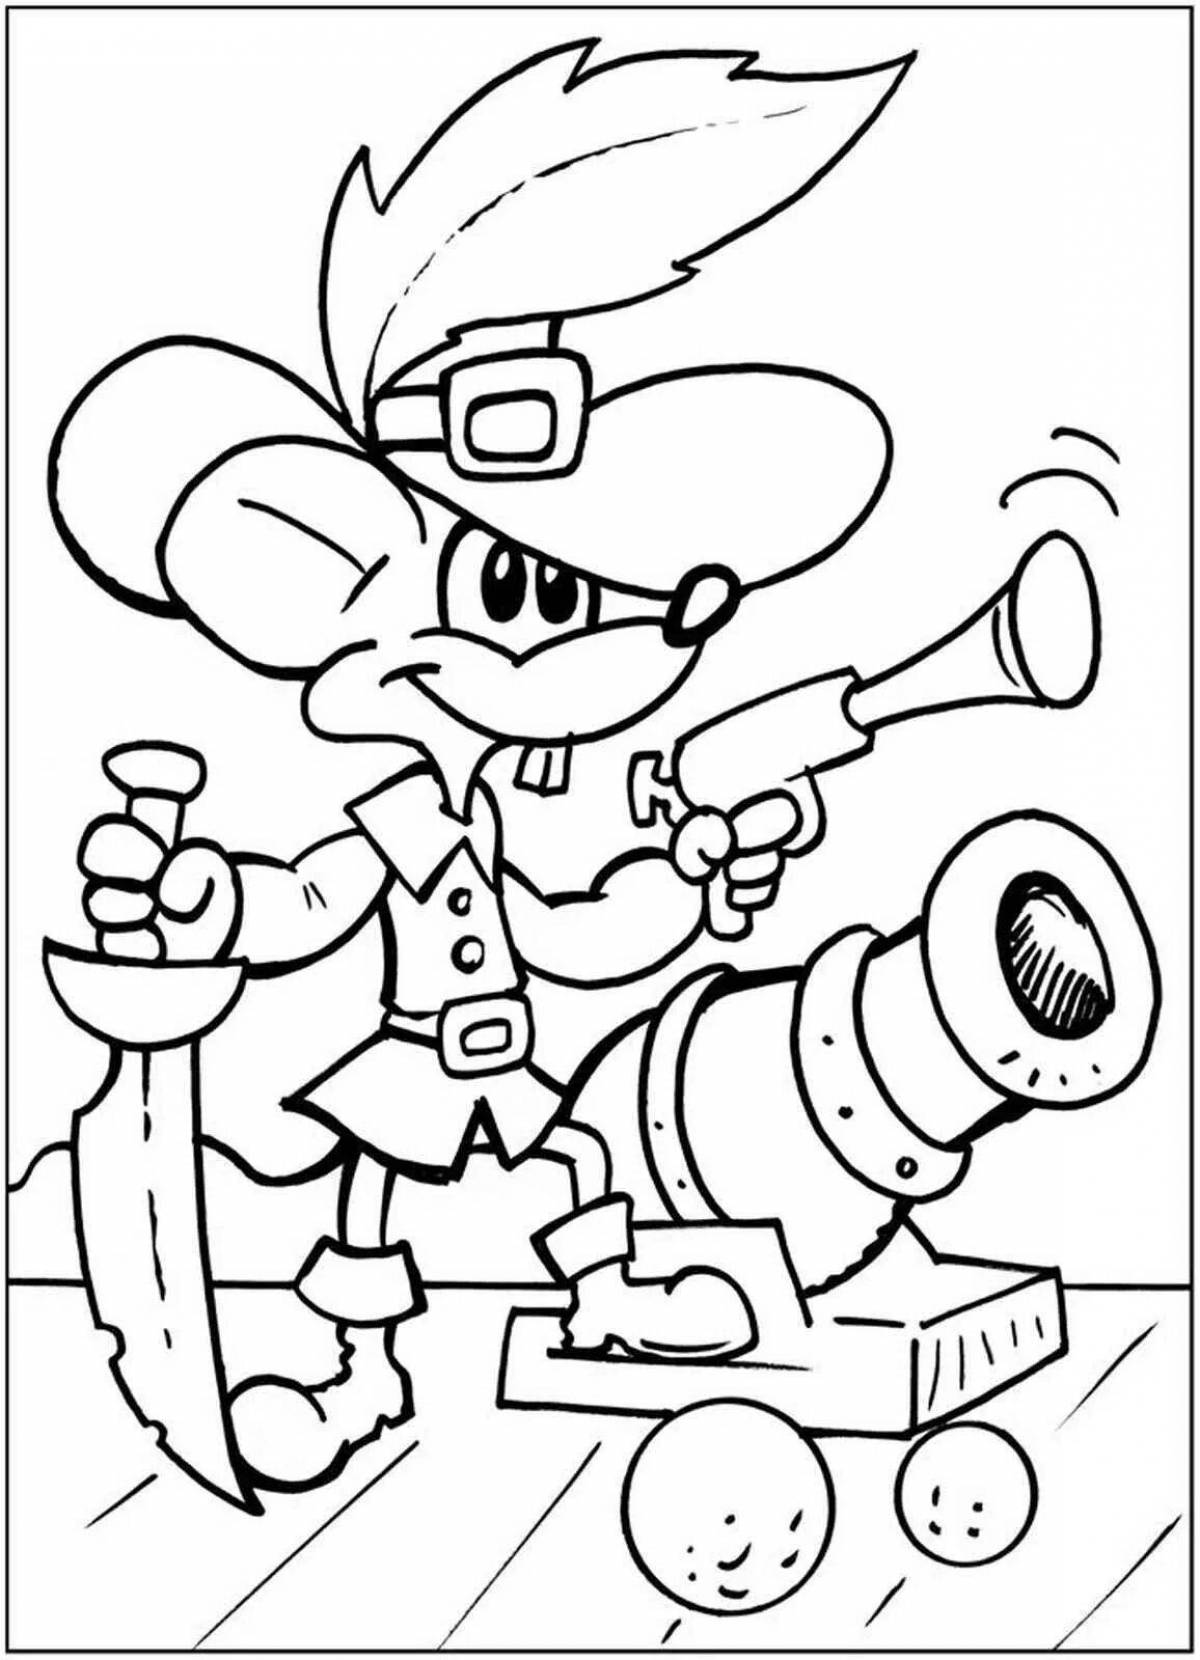 Magic leopold coloring page